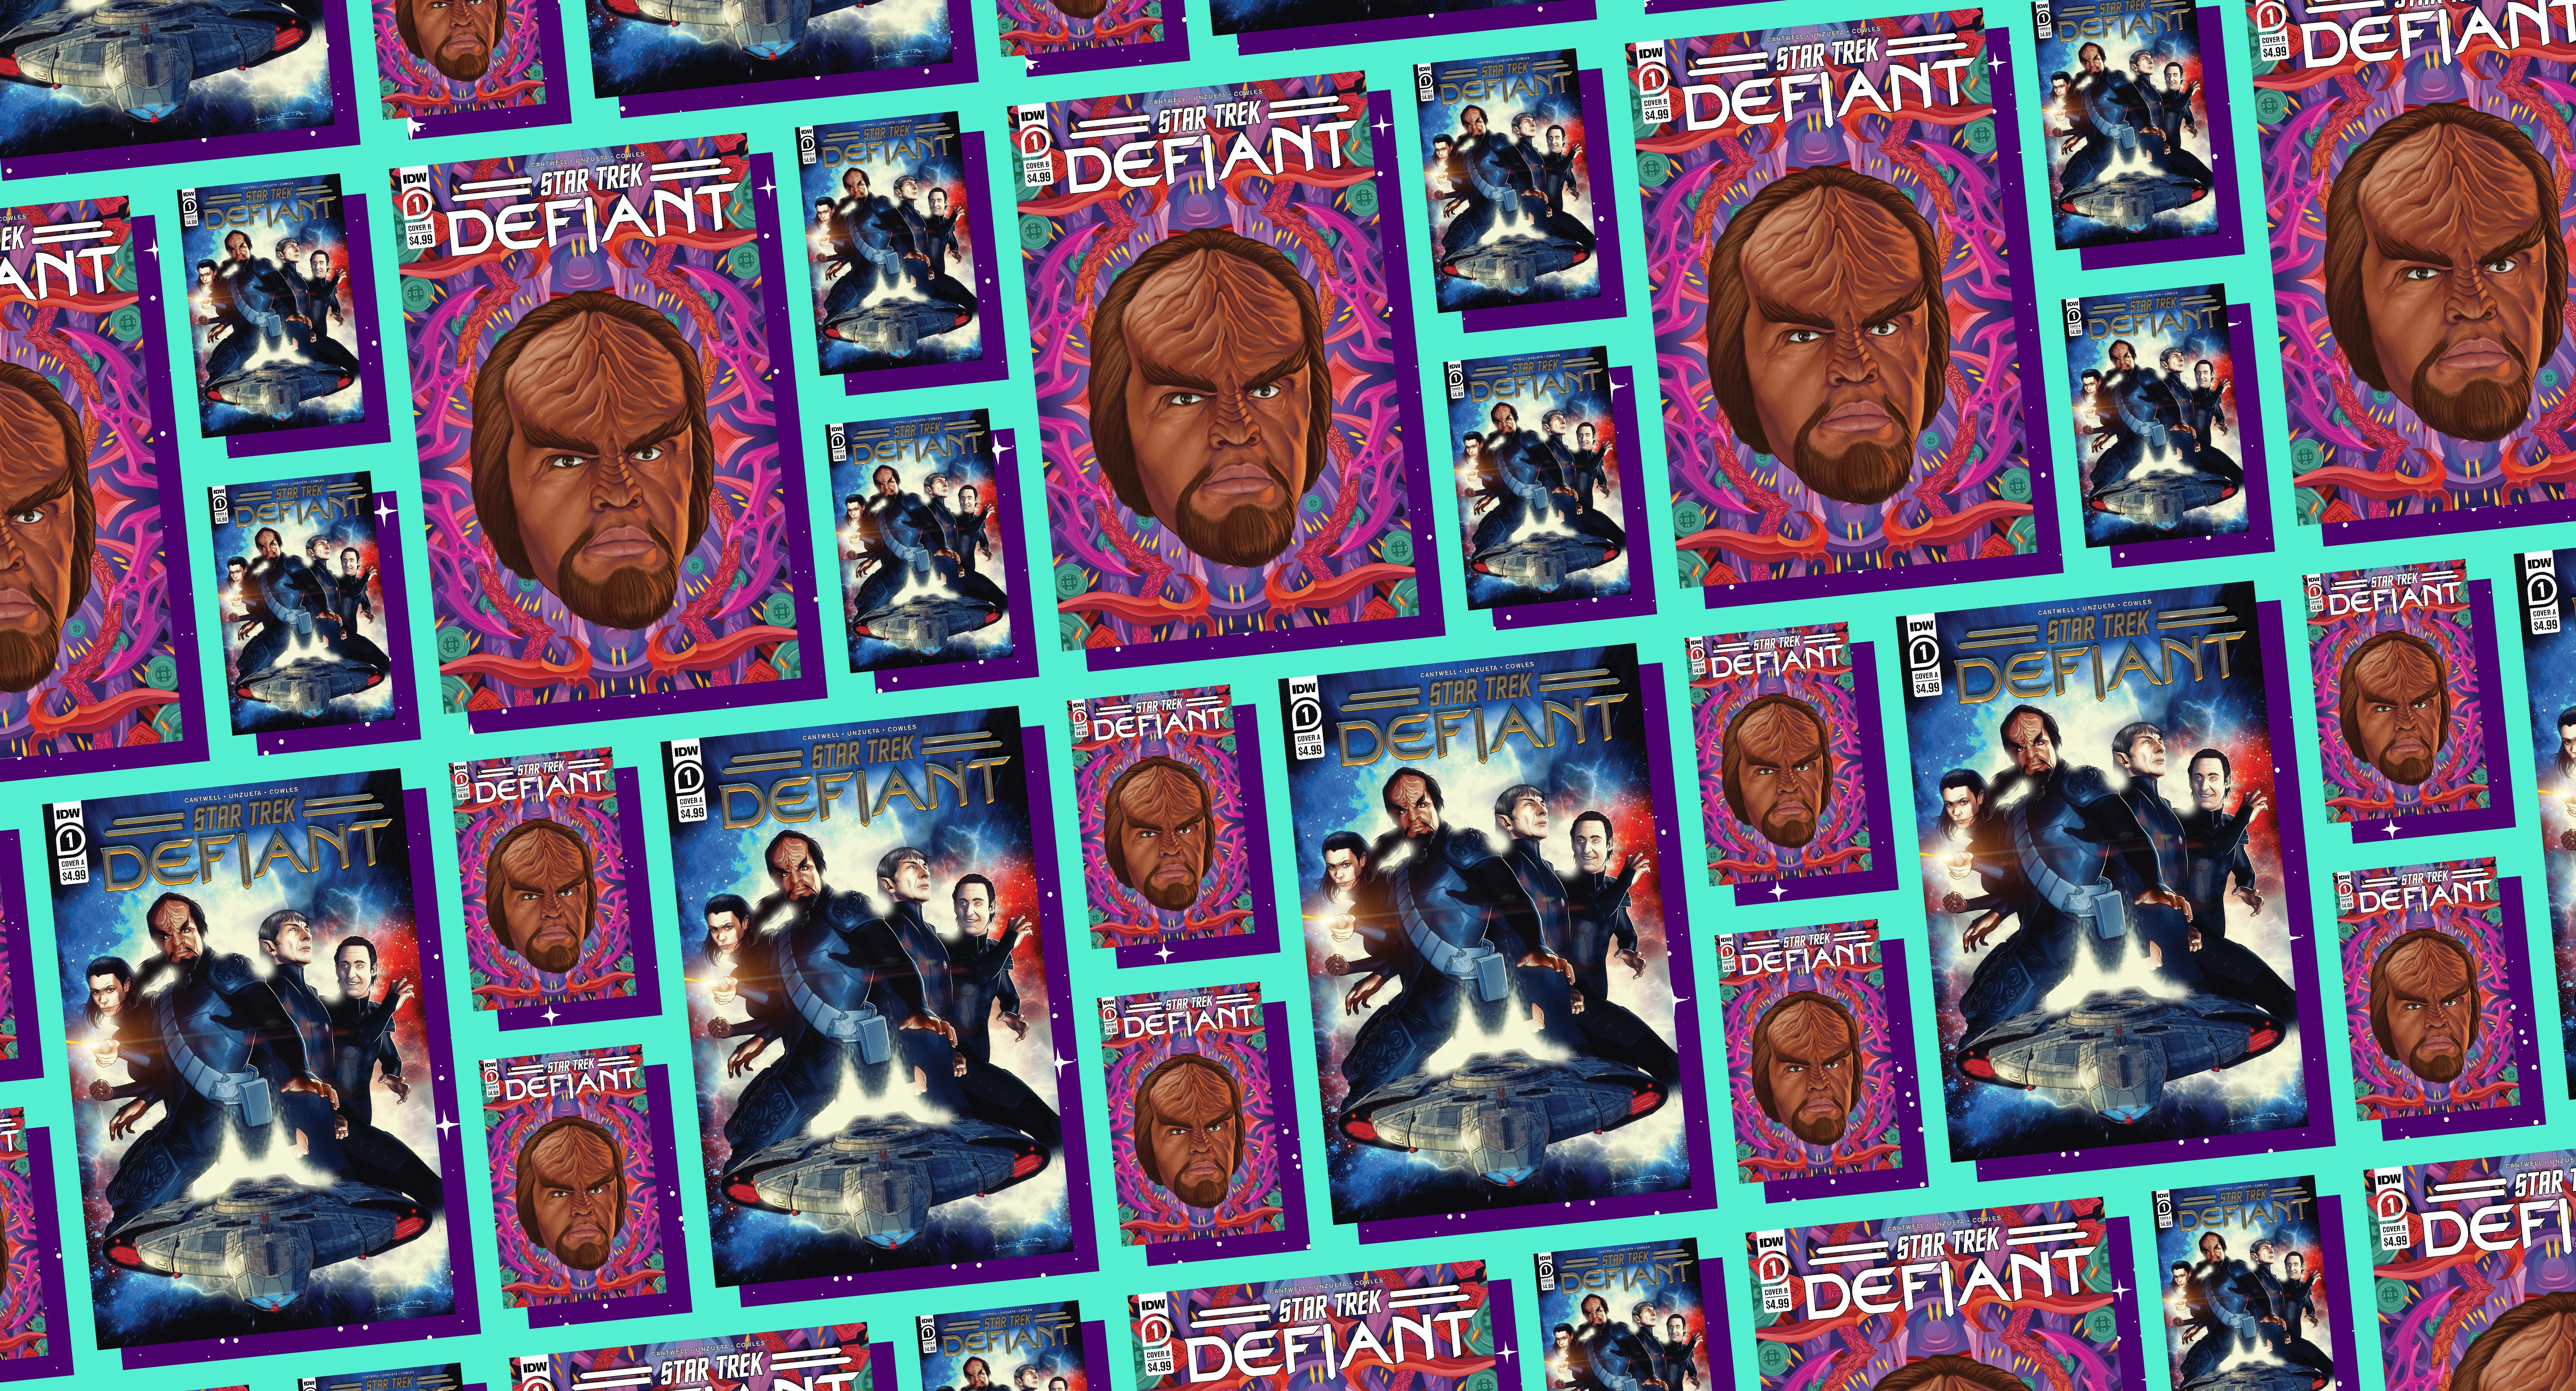 Illustrated banner of the STAR TREK: DEFIANT comic covers from IDW